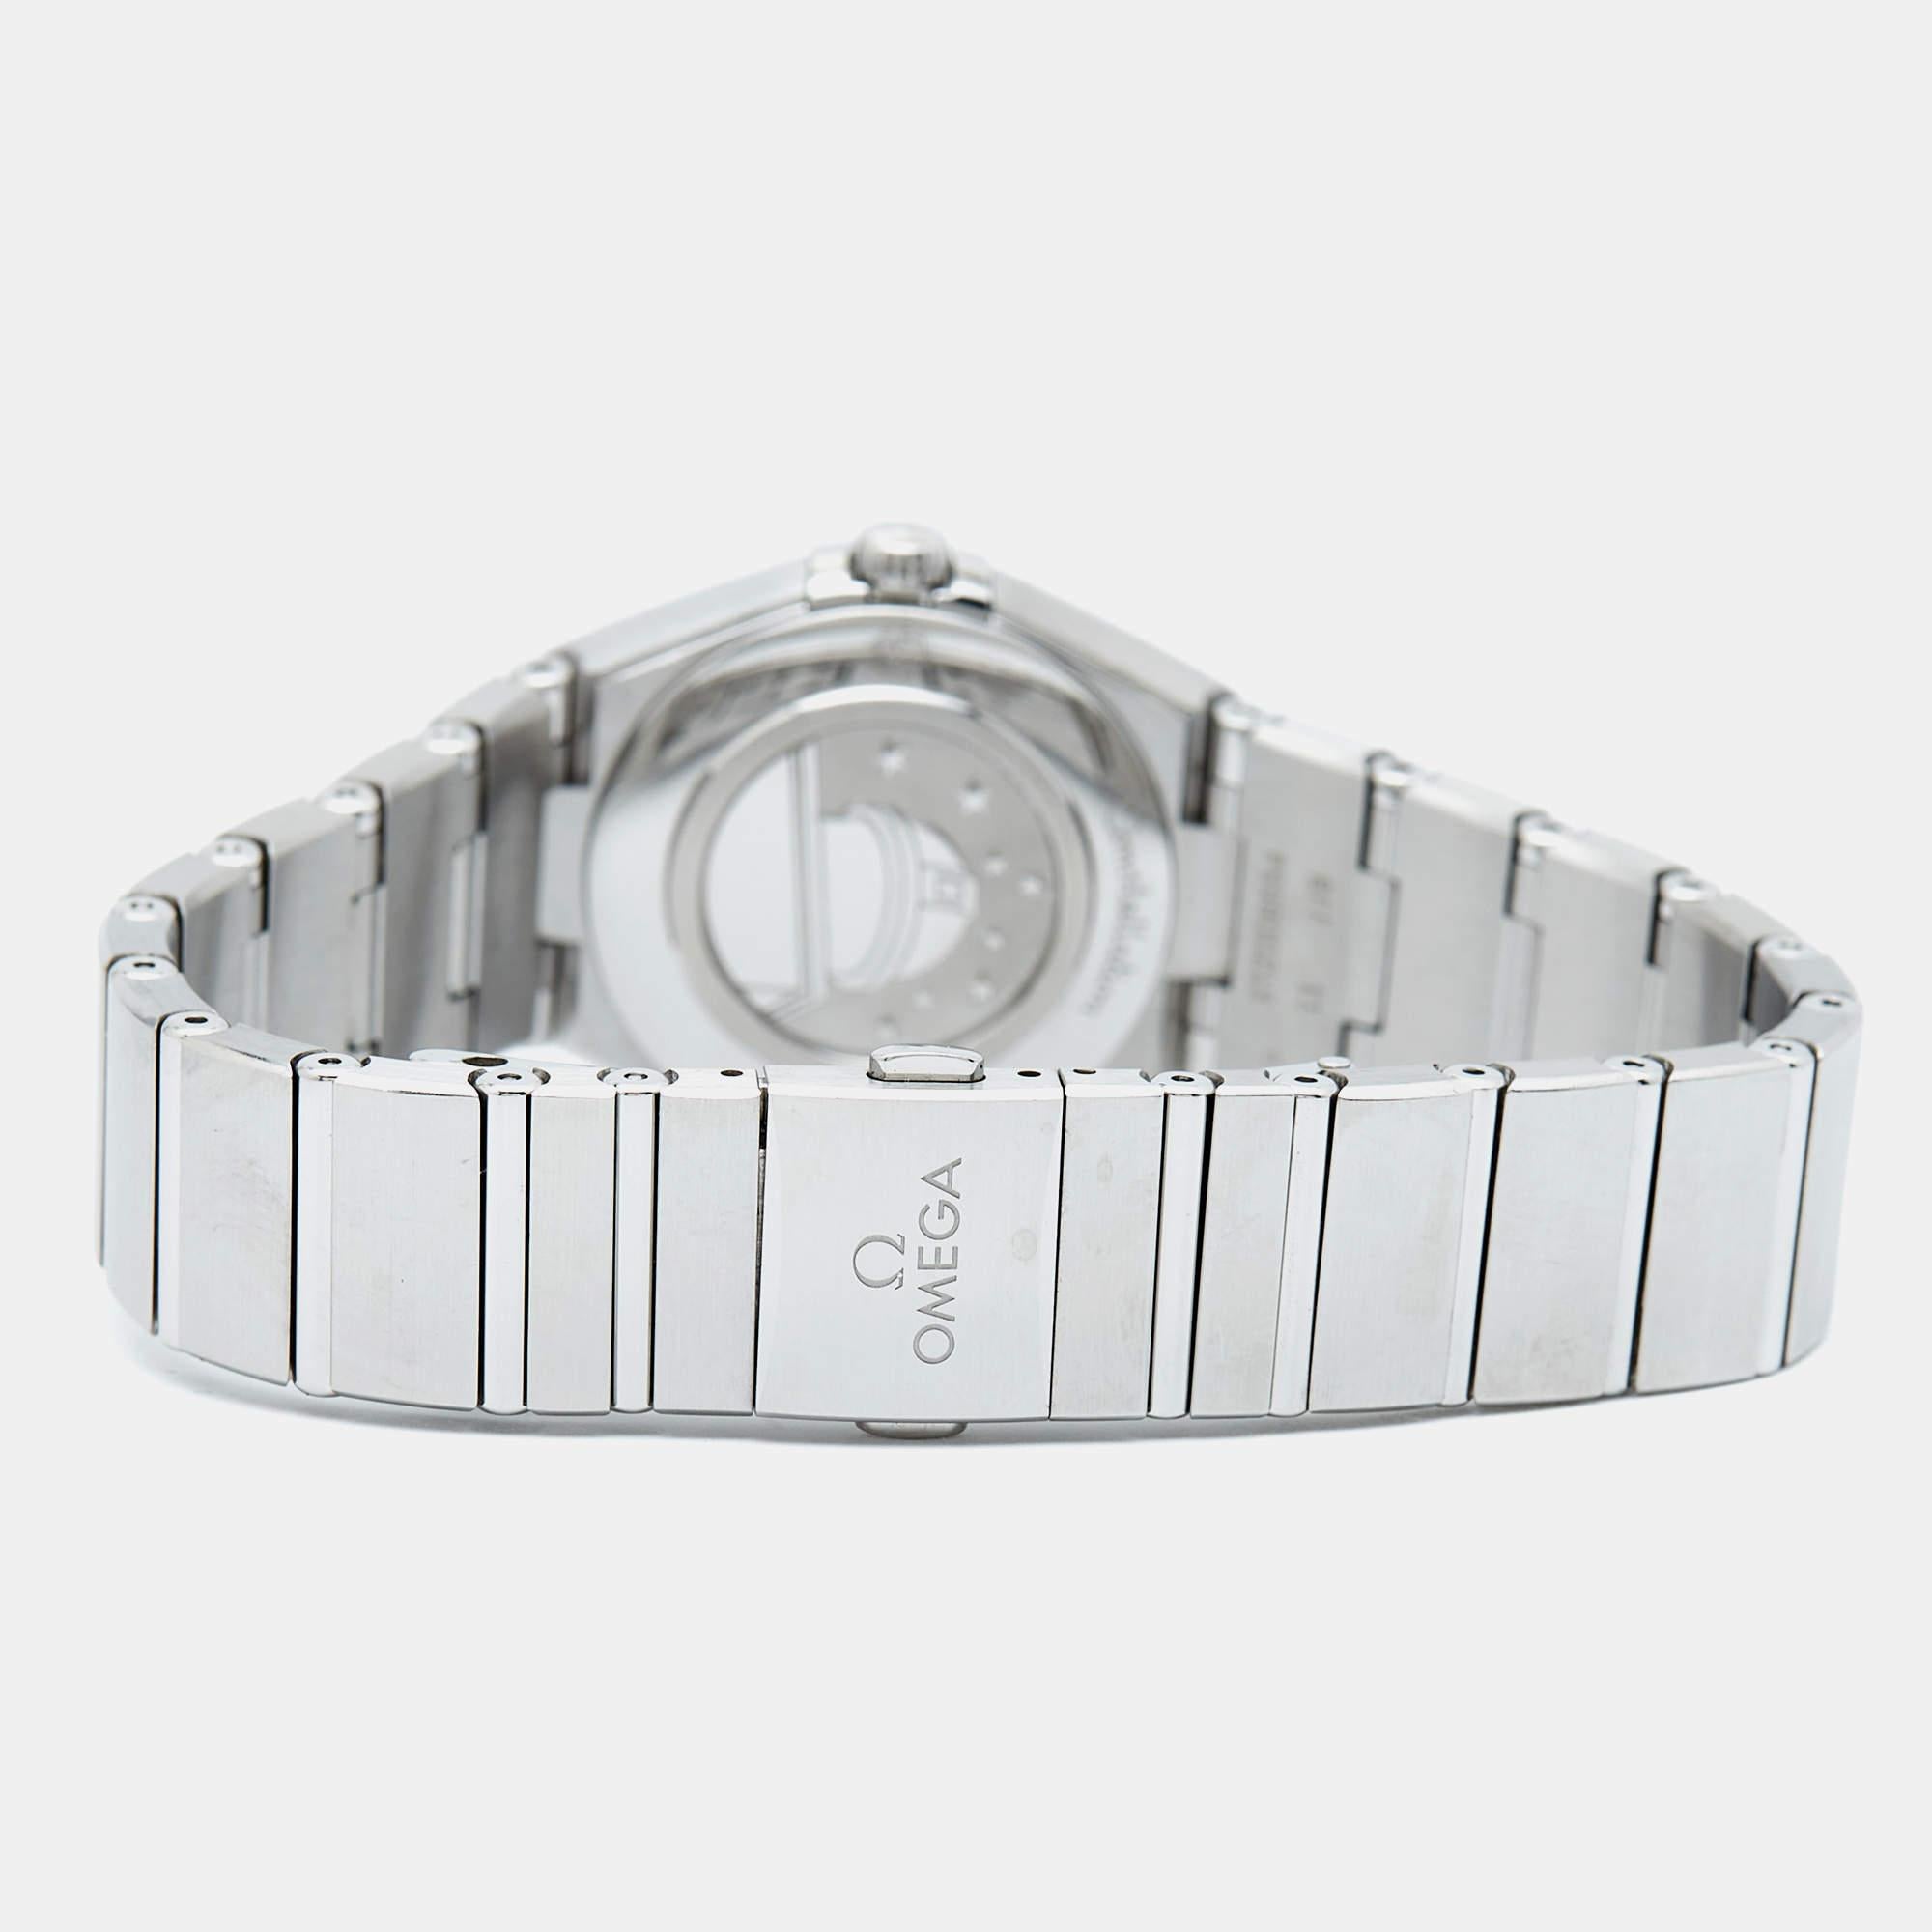 Omega Silver Diamond Stainless Steel Constellation 131.10.28.60.52.001 Women's W For Sale 4